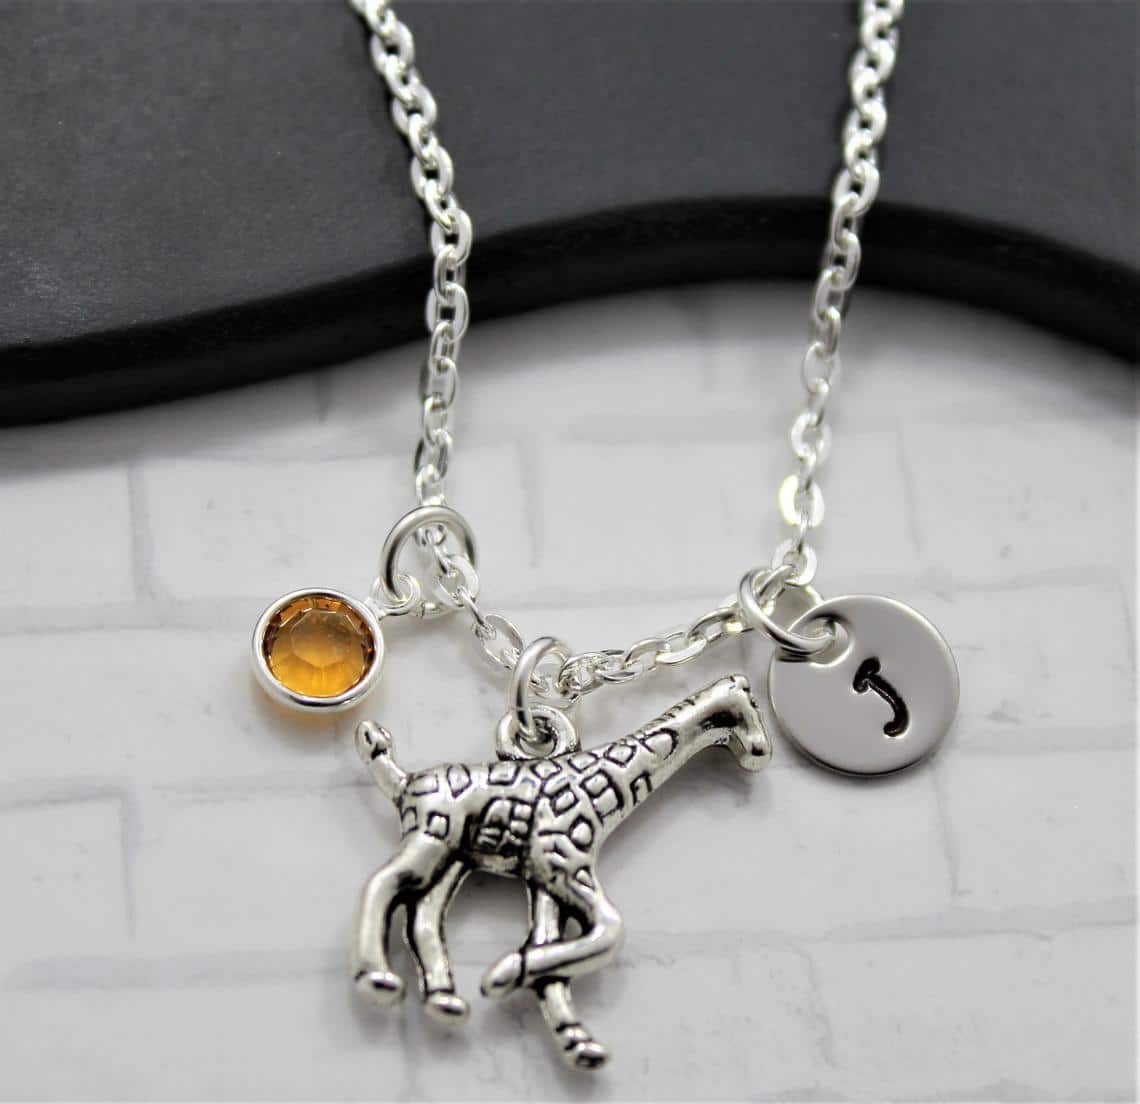 Giraffe Enthusiast’s Personalized Necklace